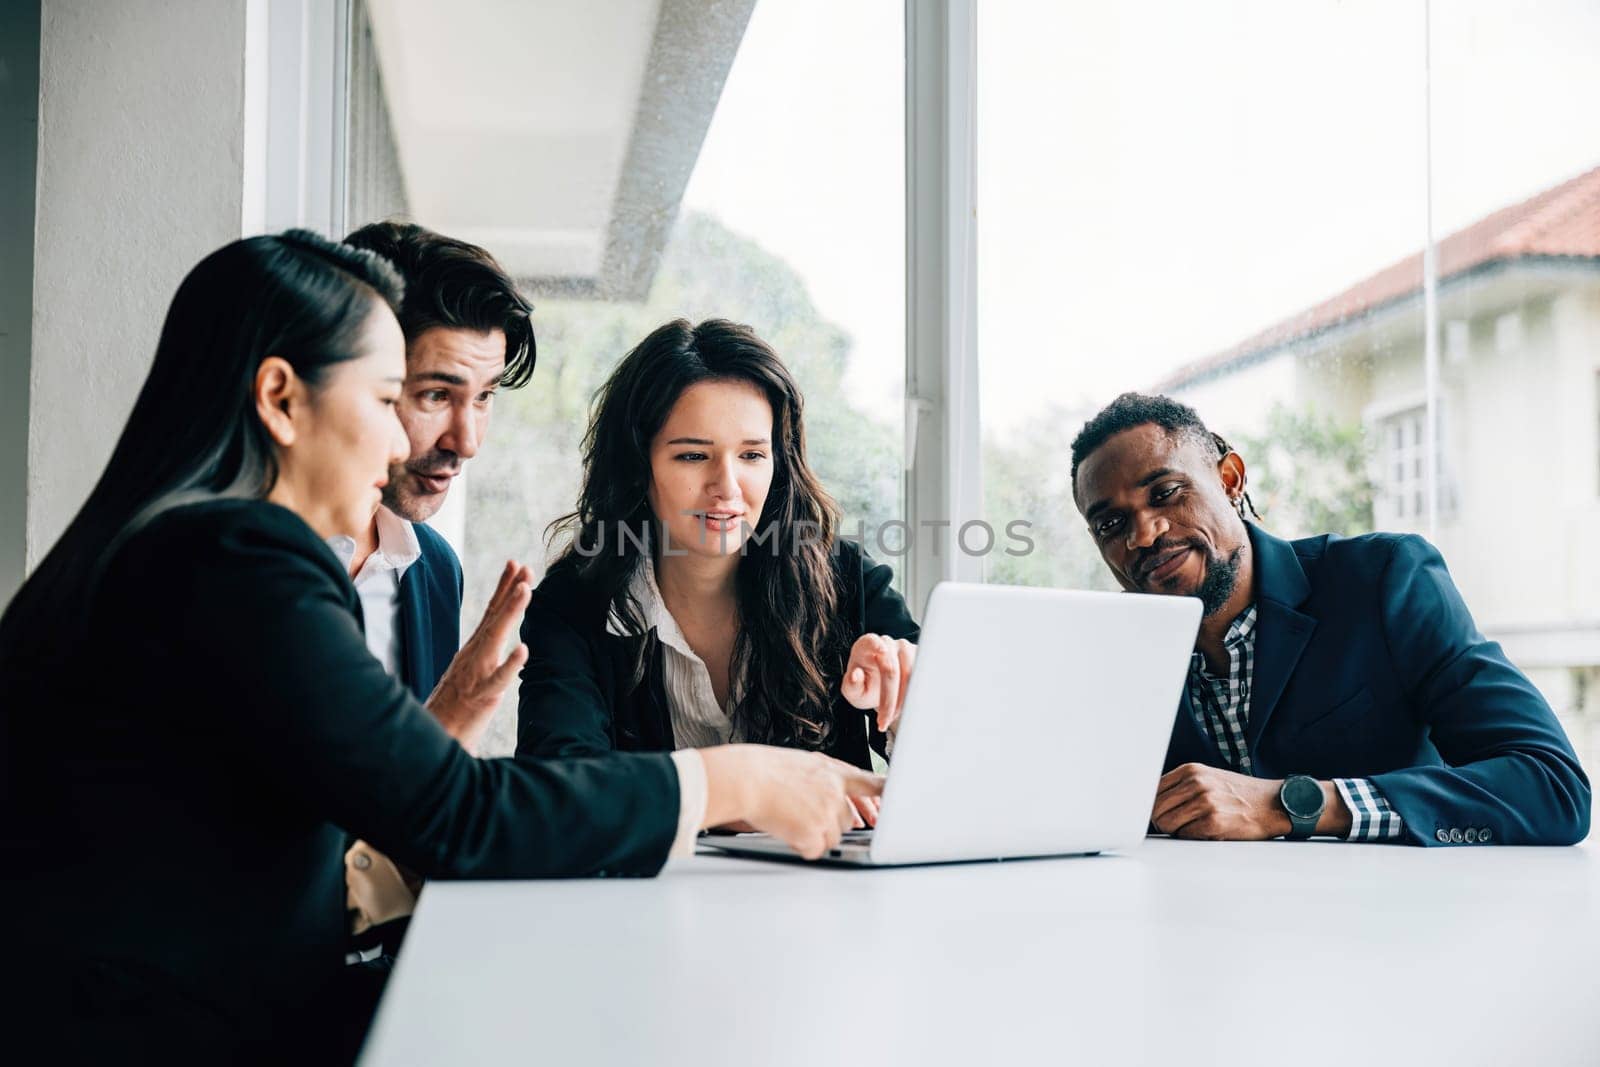 In an office meeting room, both men and women from diverse business team work together on laptop. Their teamwork, diversity and collaboration are palpable they discuss plan and strategize for success.